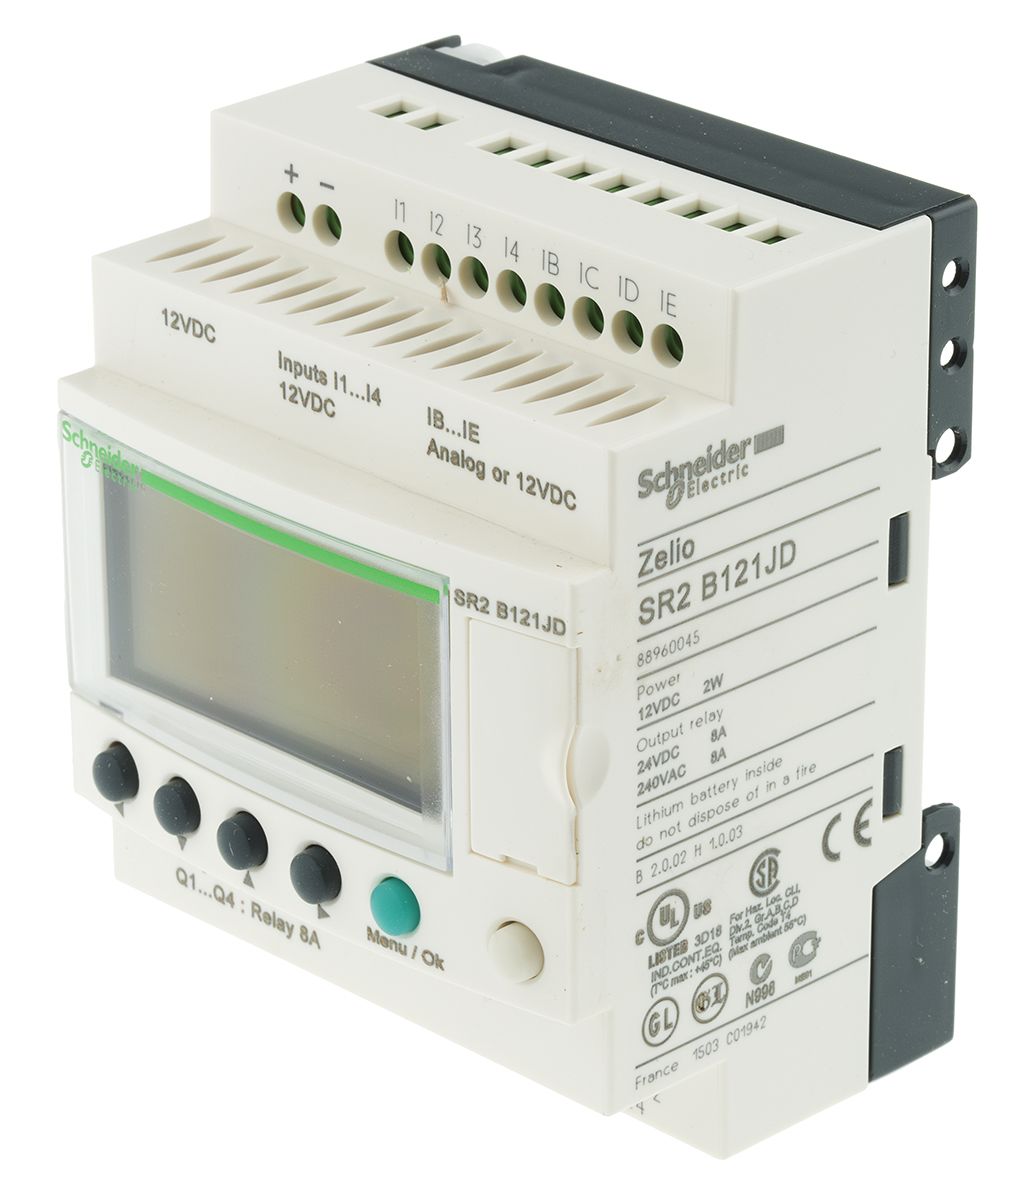 Schneider Electric Zelio Logic Logic Module - 8 Inputs, 4 Outputs, Relay, Computer, Operating Panel Interface